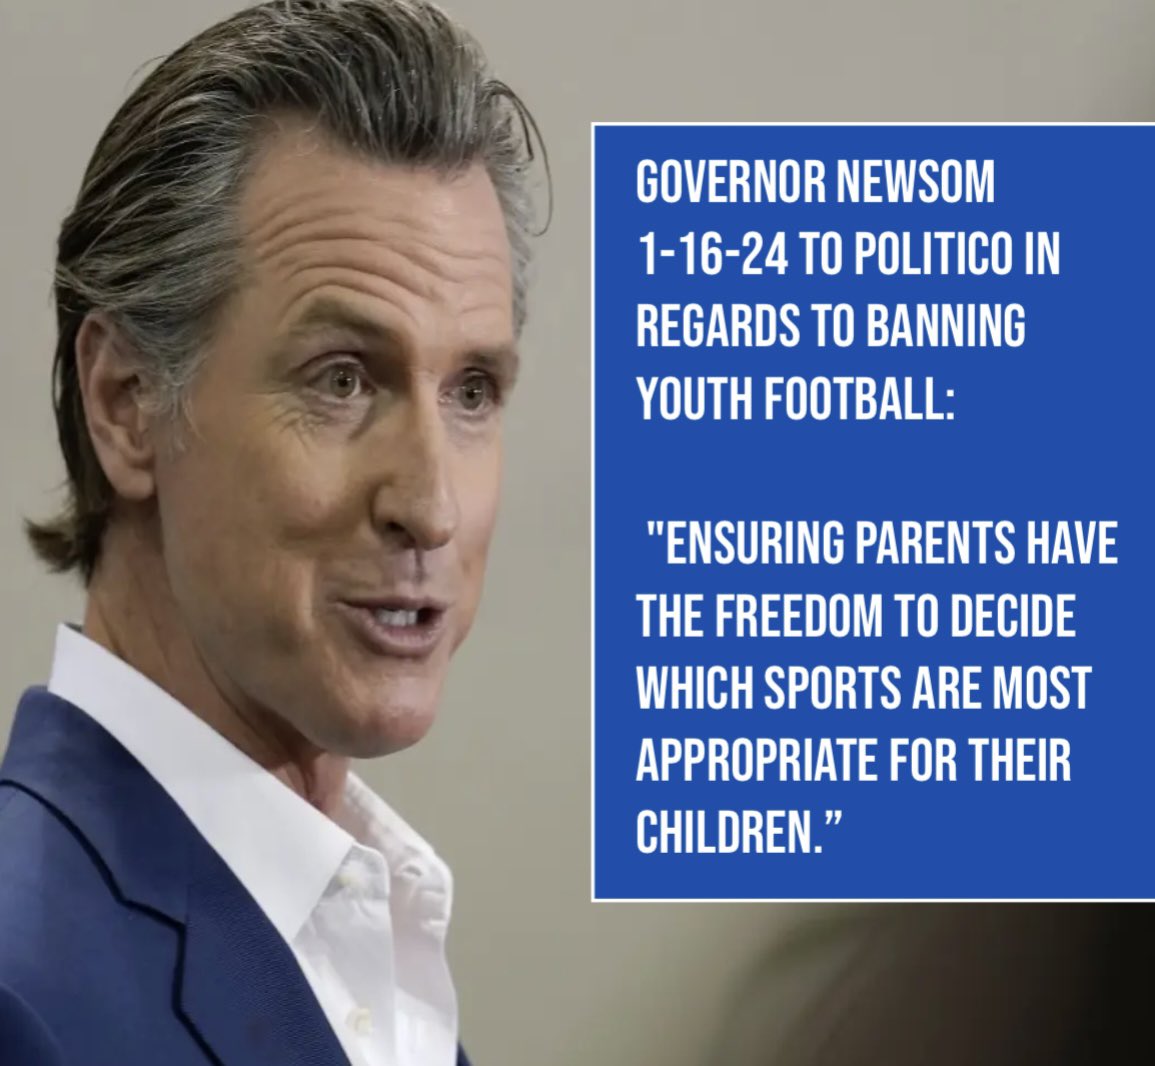 Your daily reminder: Our Governor has said he believes Parents should choose their children’s sports in California. Not him, not other Politicians or the California Surgeon General. Let’s see if he keeps his word. @CAgovernor